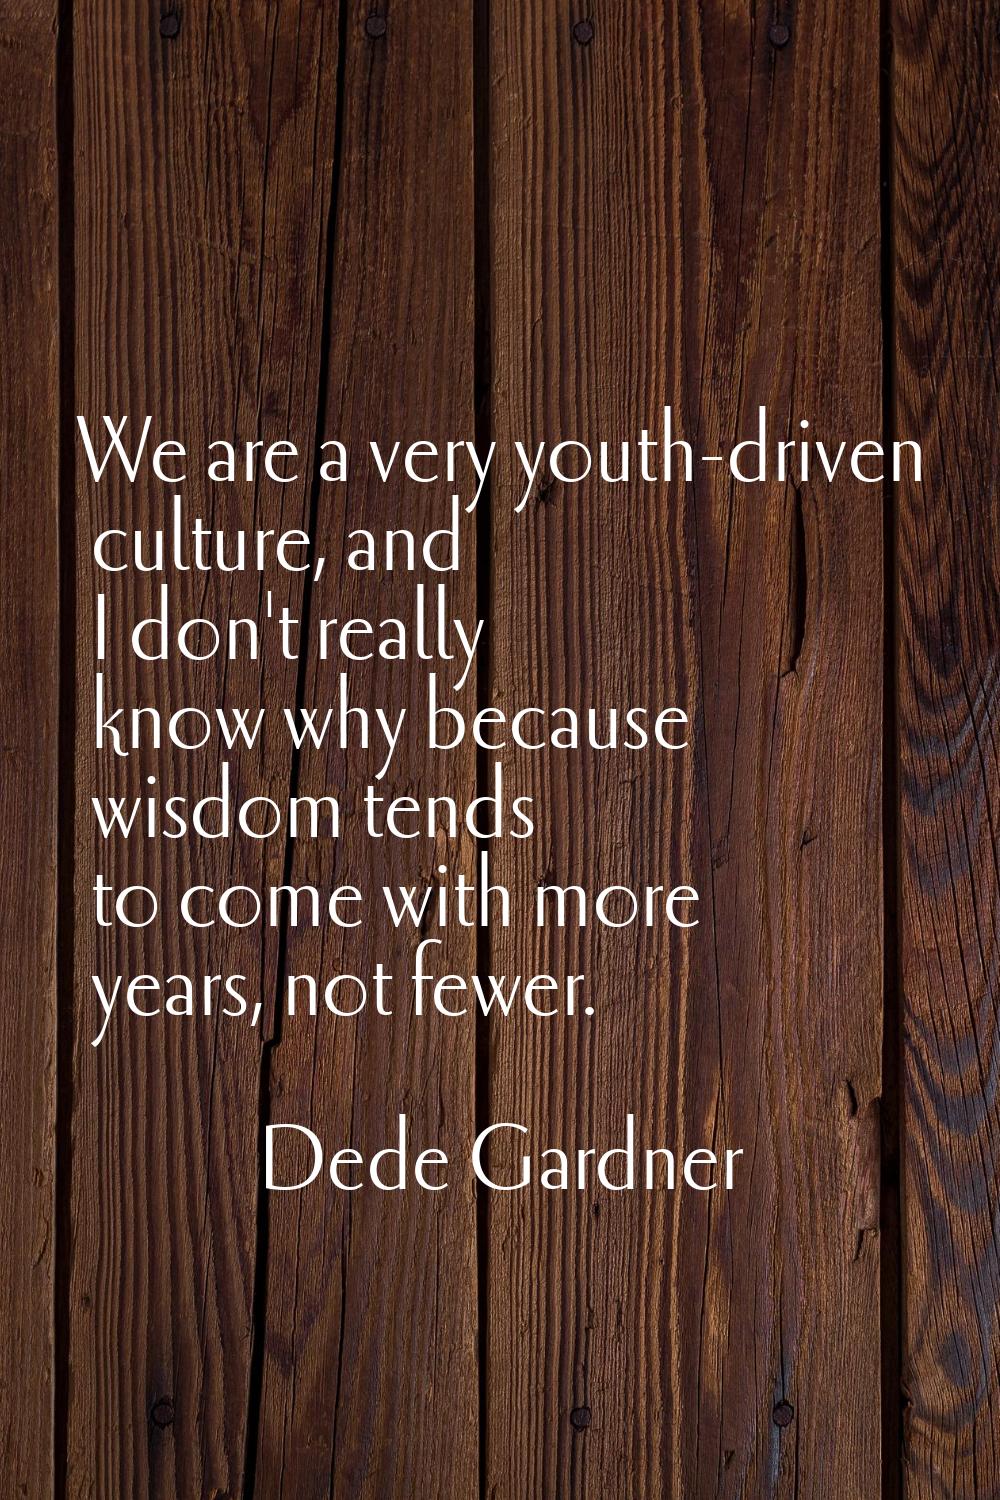 We are a very youth-driven culture, and I don't really know why because wisdom tends to come with m